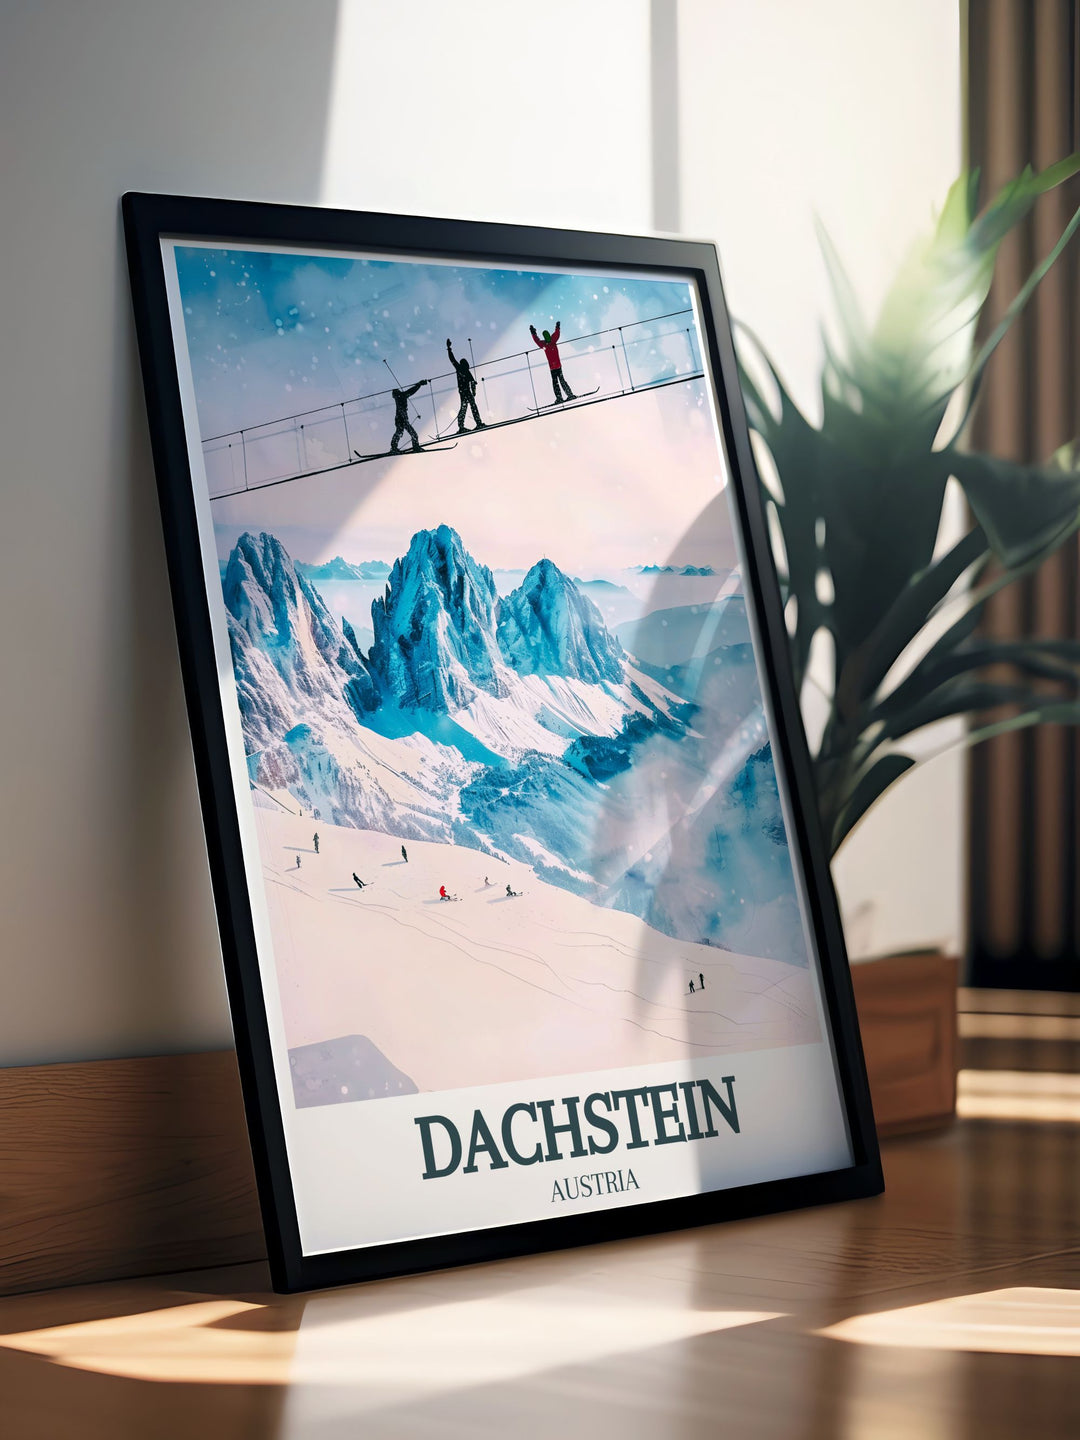 Detailed Dachstein Glacier, Skywalk poster featuring the picturesque scenery of Dachstein Austria ideal for transforming living spaces into serene and elegant havens.